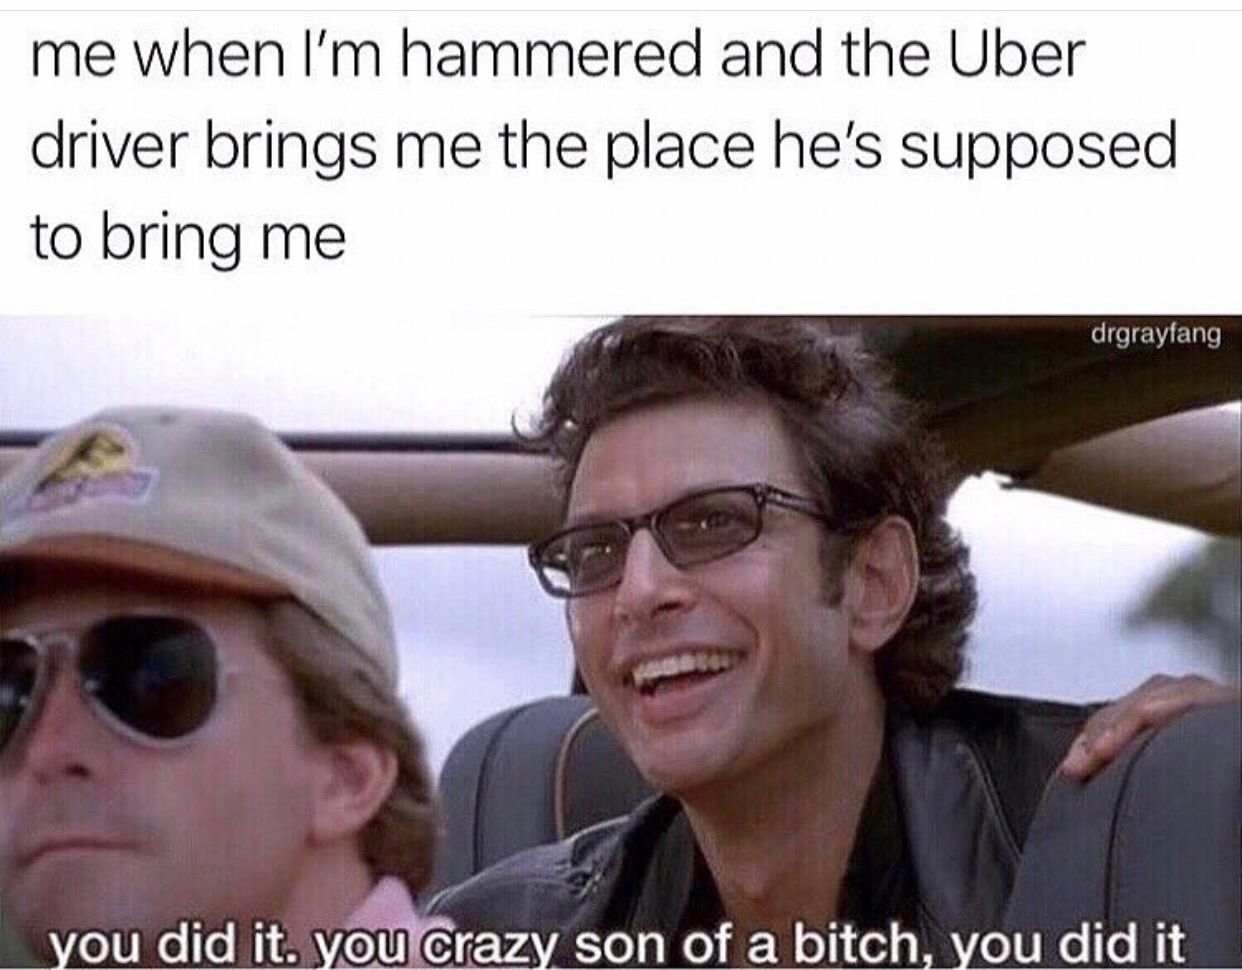 you crazy son of a bitch you did it meme - me when I'm hammered and the Uber driver brings me the place he's supposed to bring me drgrayfang you did it. you crazy son of a bitch, you did it